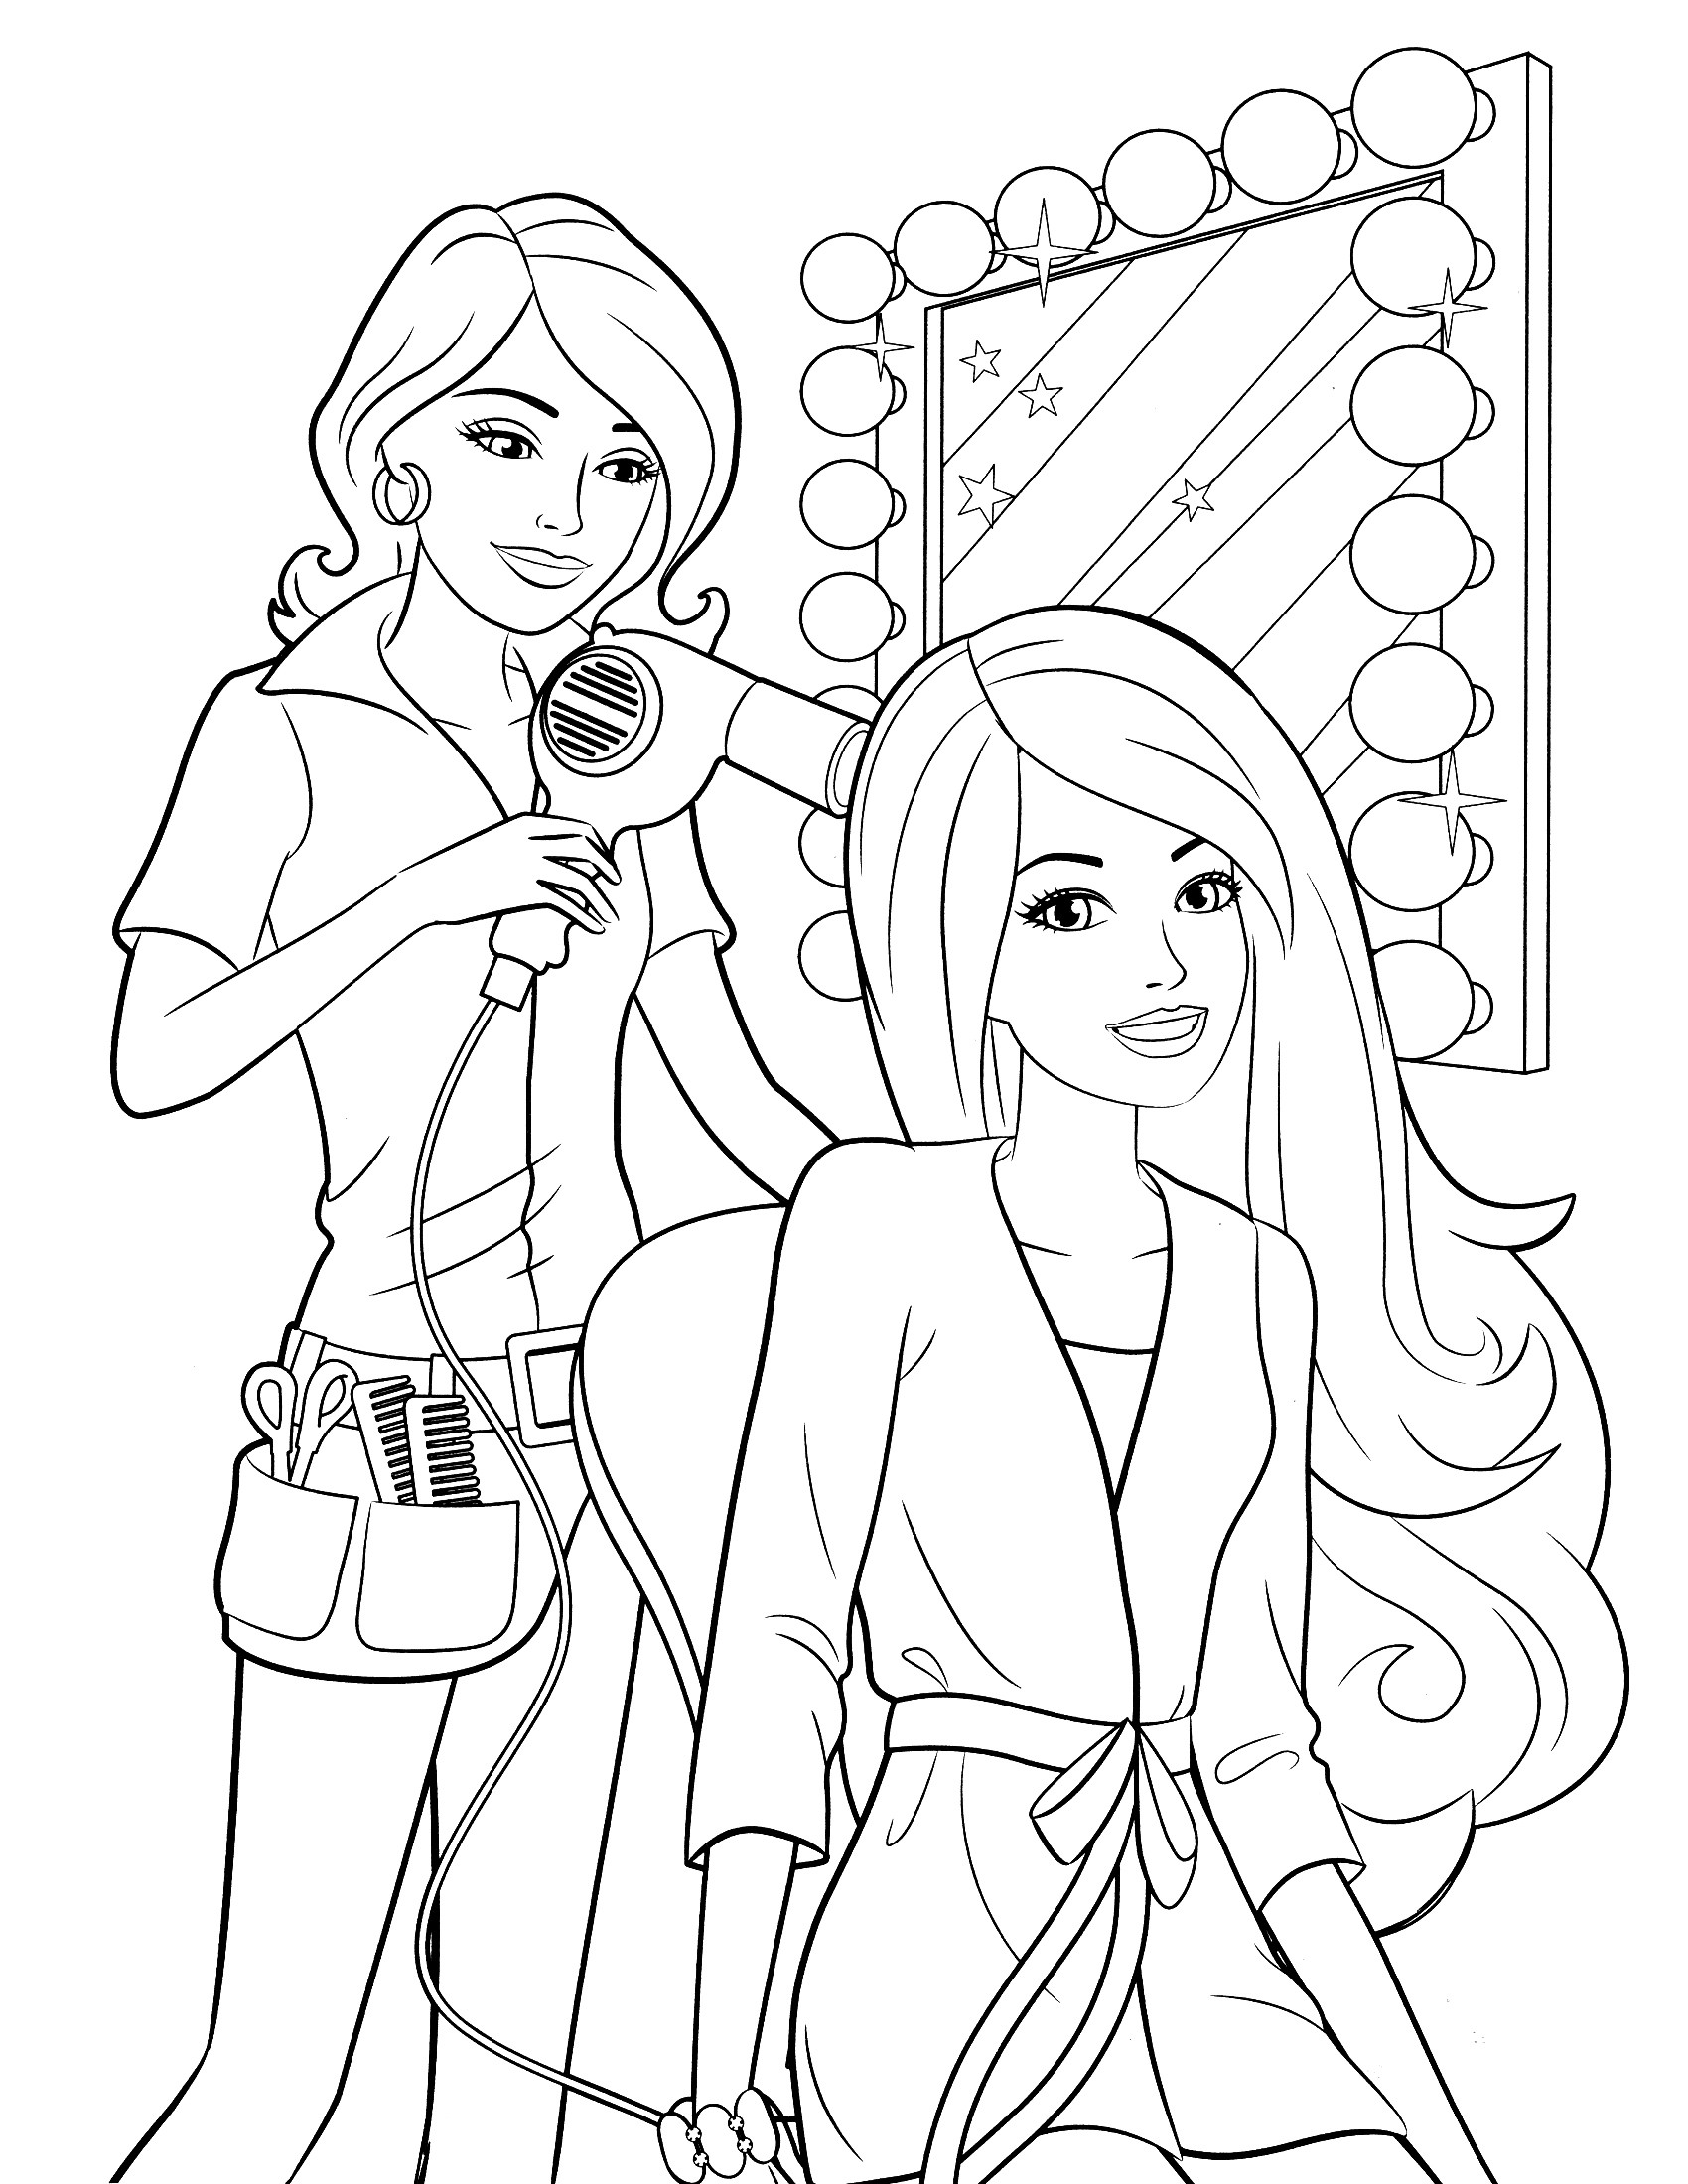 Girls Coloring Book
 Coloring Pages for Girls Best Coloring Pages For Kids